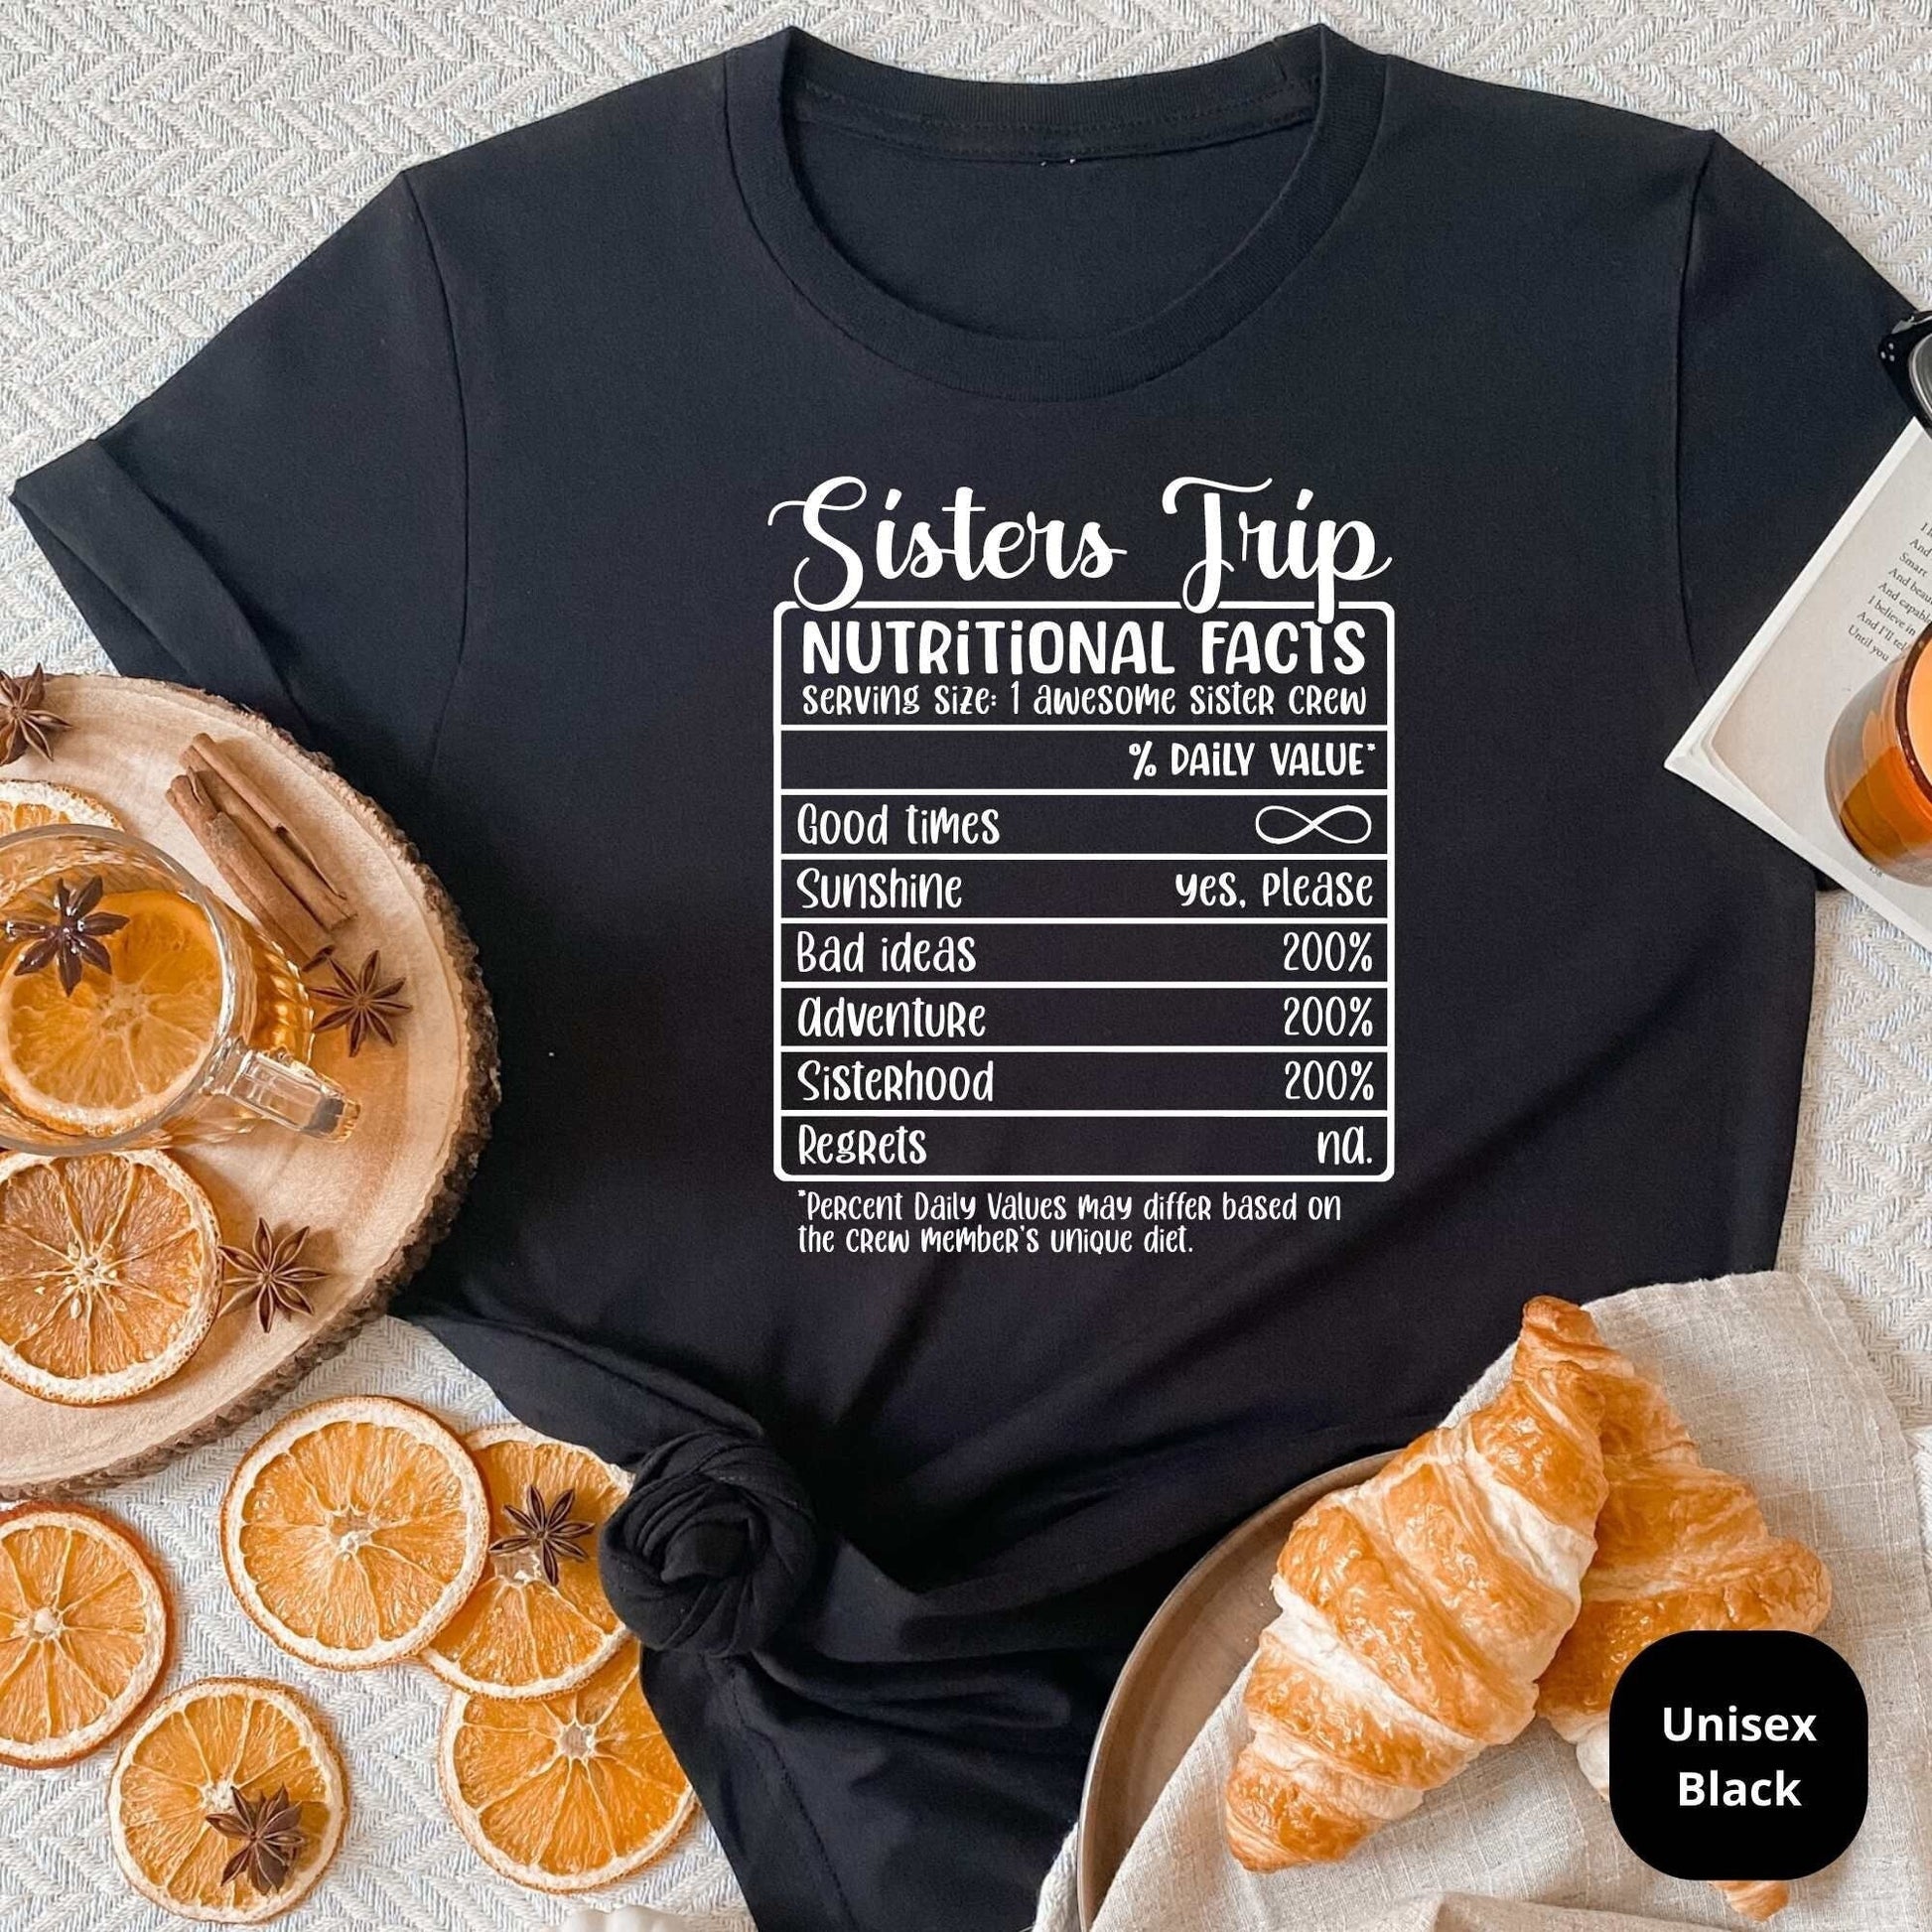 Girls Trip Shirts, Sisters Vacation, Best Friends Gifts, Matching Group Vacation Tees, Mother Daughter Trip, BFF Vacay, Besties Weekend